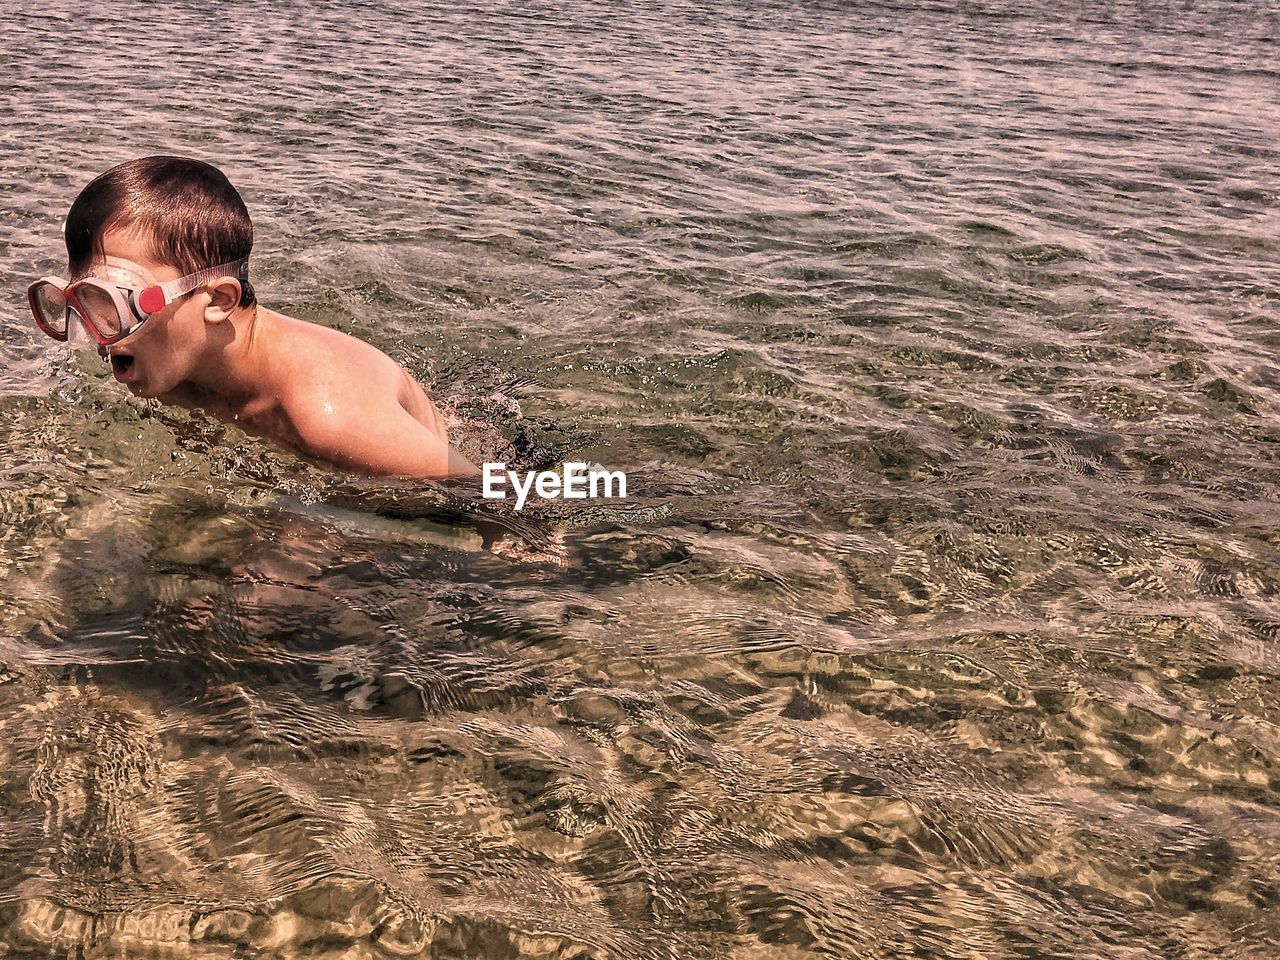 High angle view of shirtless boy swimming in sea